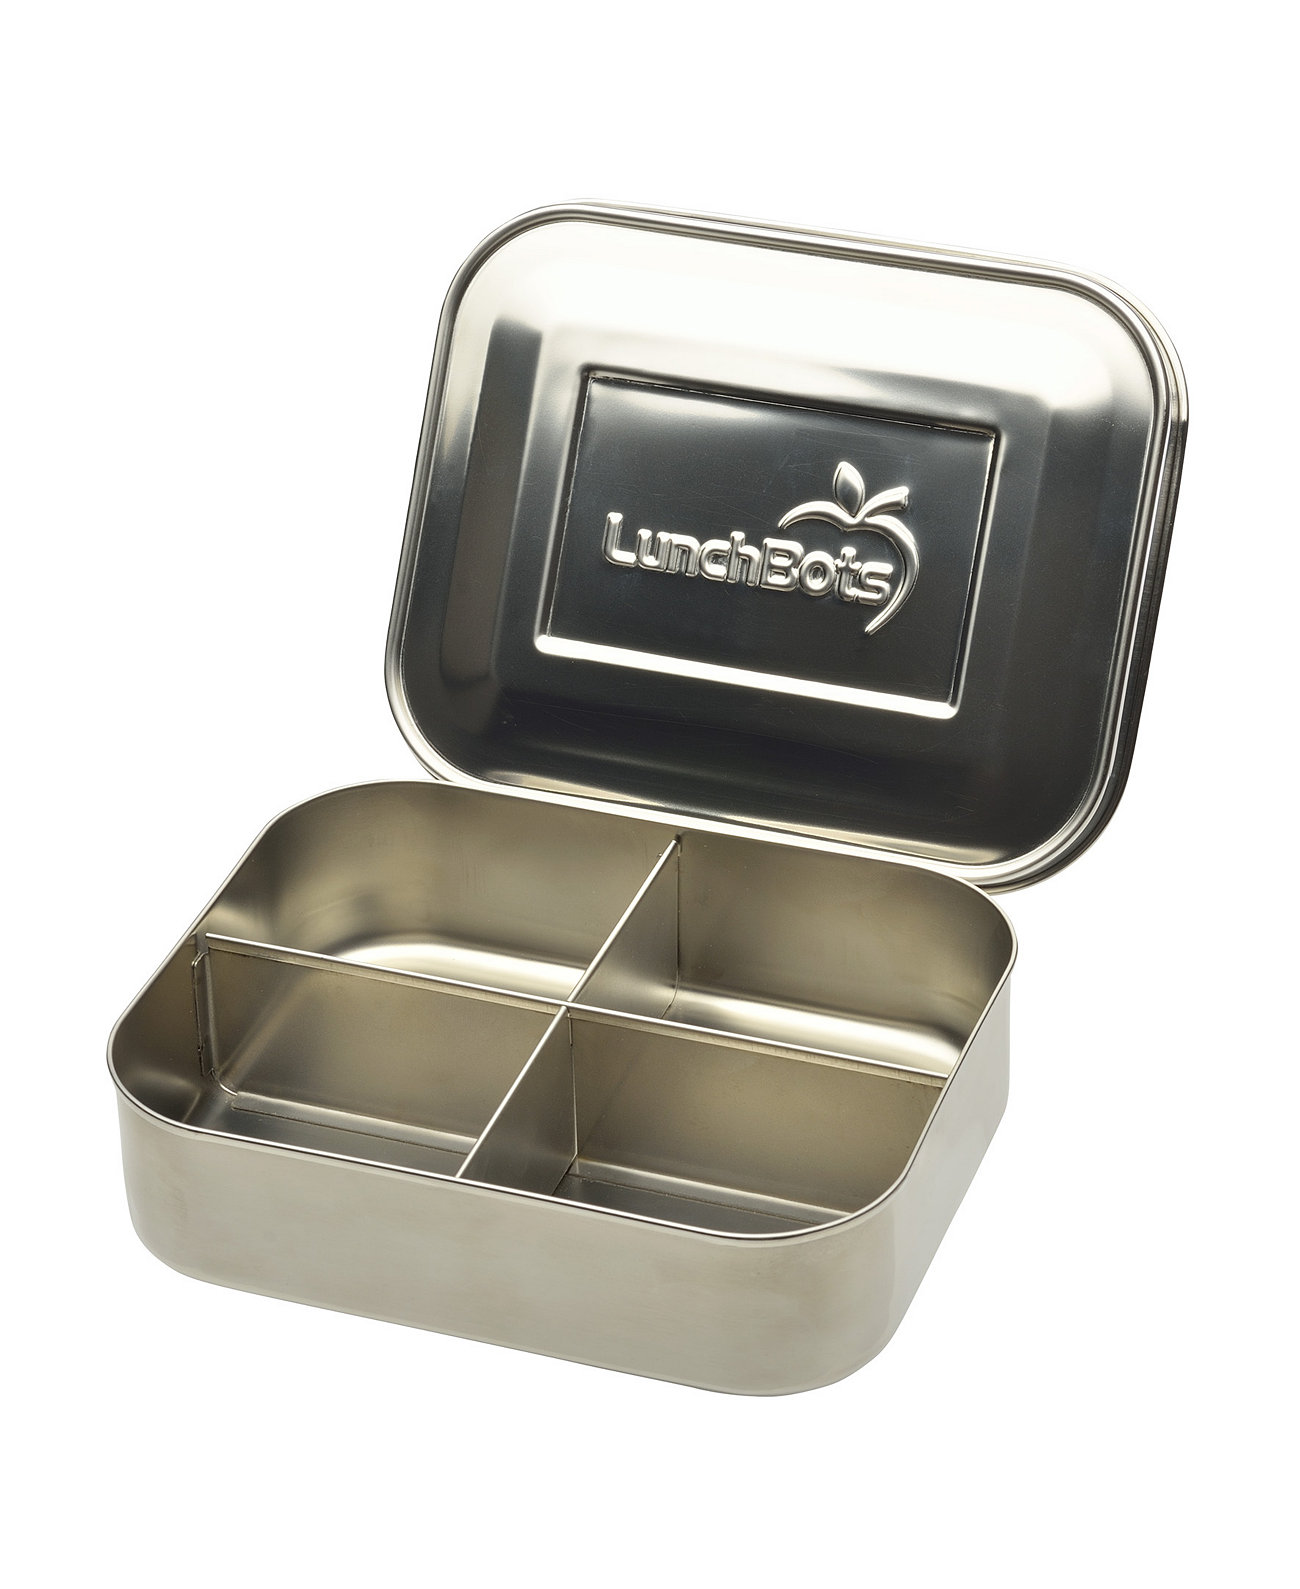 Stainless Steel Containers. Stainless Steel Container Size. Recipient com